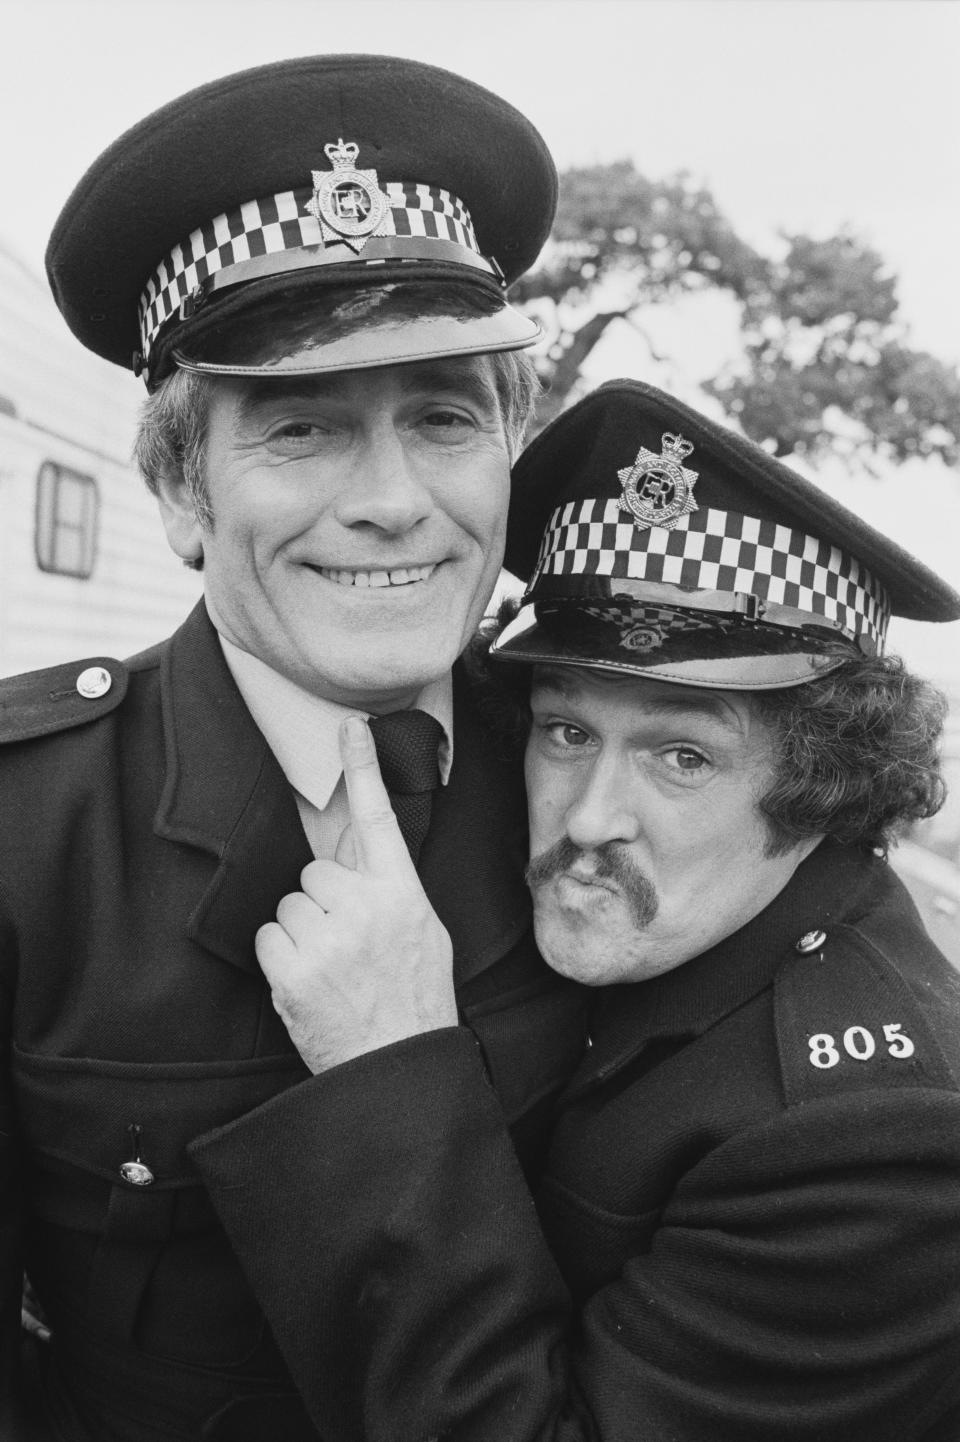 'Cannon and Ball', English comedian, actor, and singer Bobby Ball and English comedian and singer Tommy Cannon, co-stars in movie 'The Boys in Blue', UK, 13th November 1982. (Photo by Hilaria McCarthy/Daily Express/Hulton Archive/Getty Images)